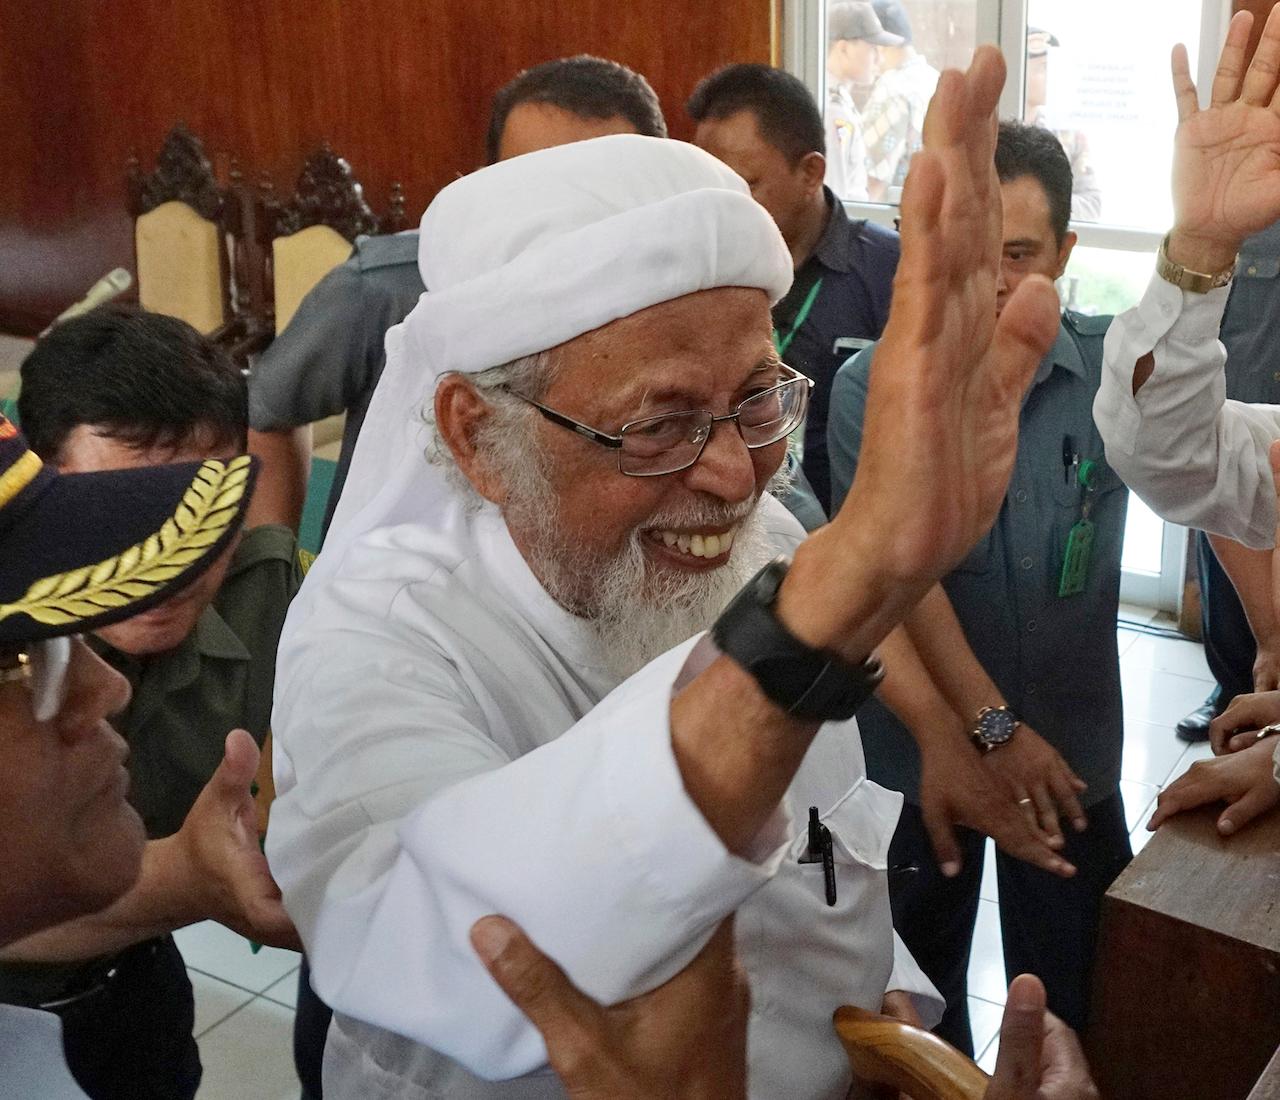 Abu Bakar Bashir was jailed in 2011 for his links to militant training camps in Aceh province. Photo: AP